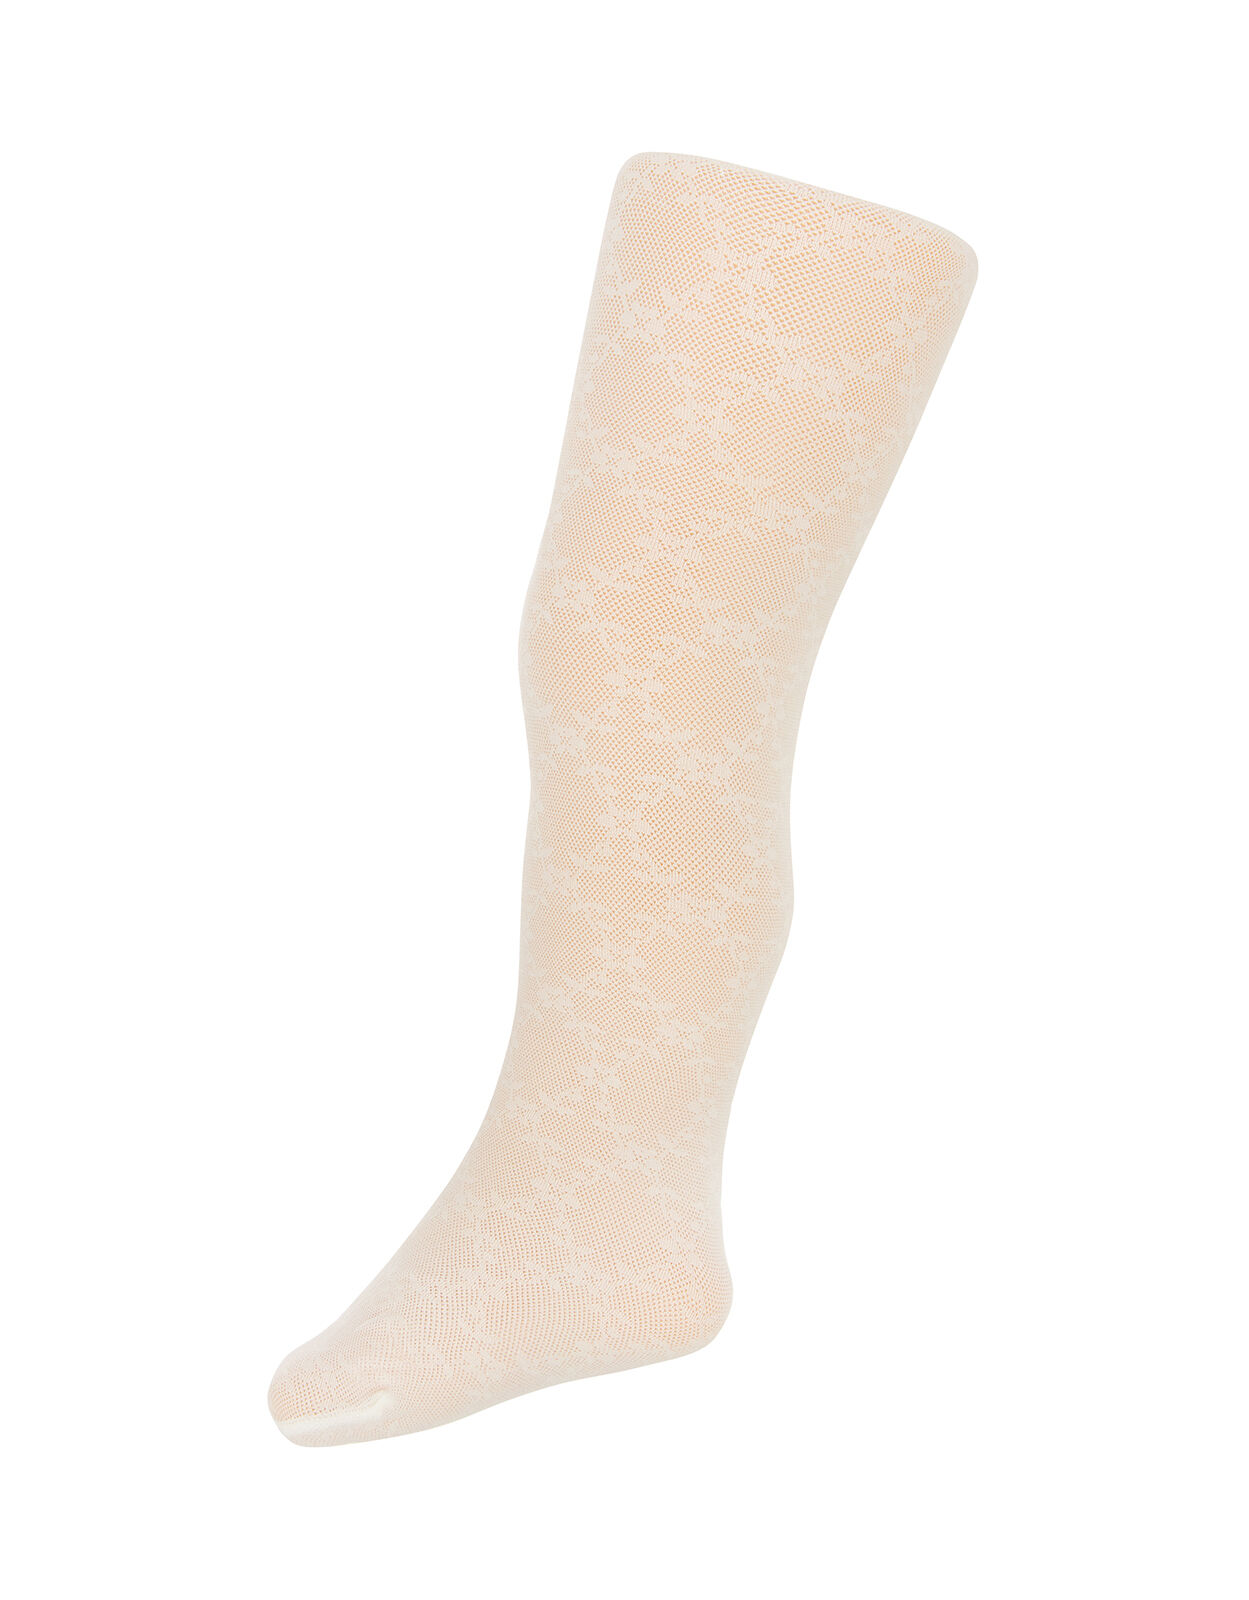 baby lace tights uk